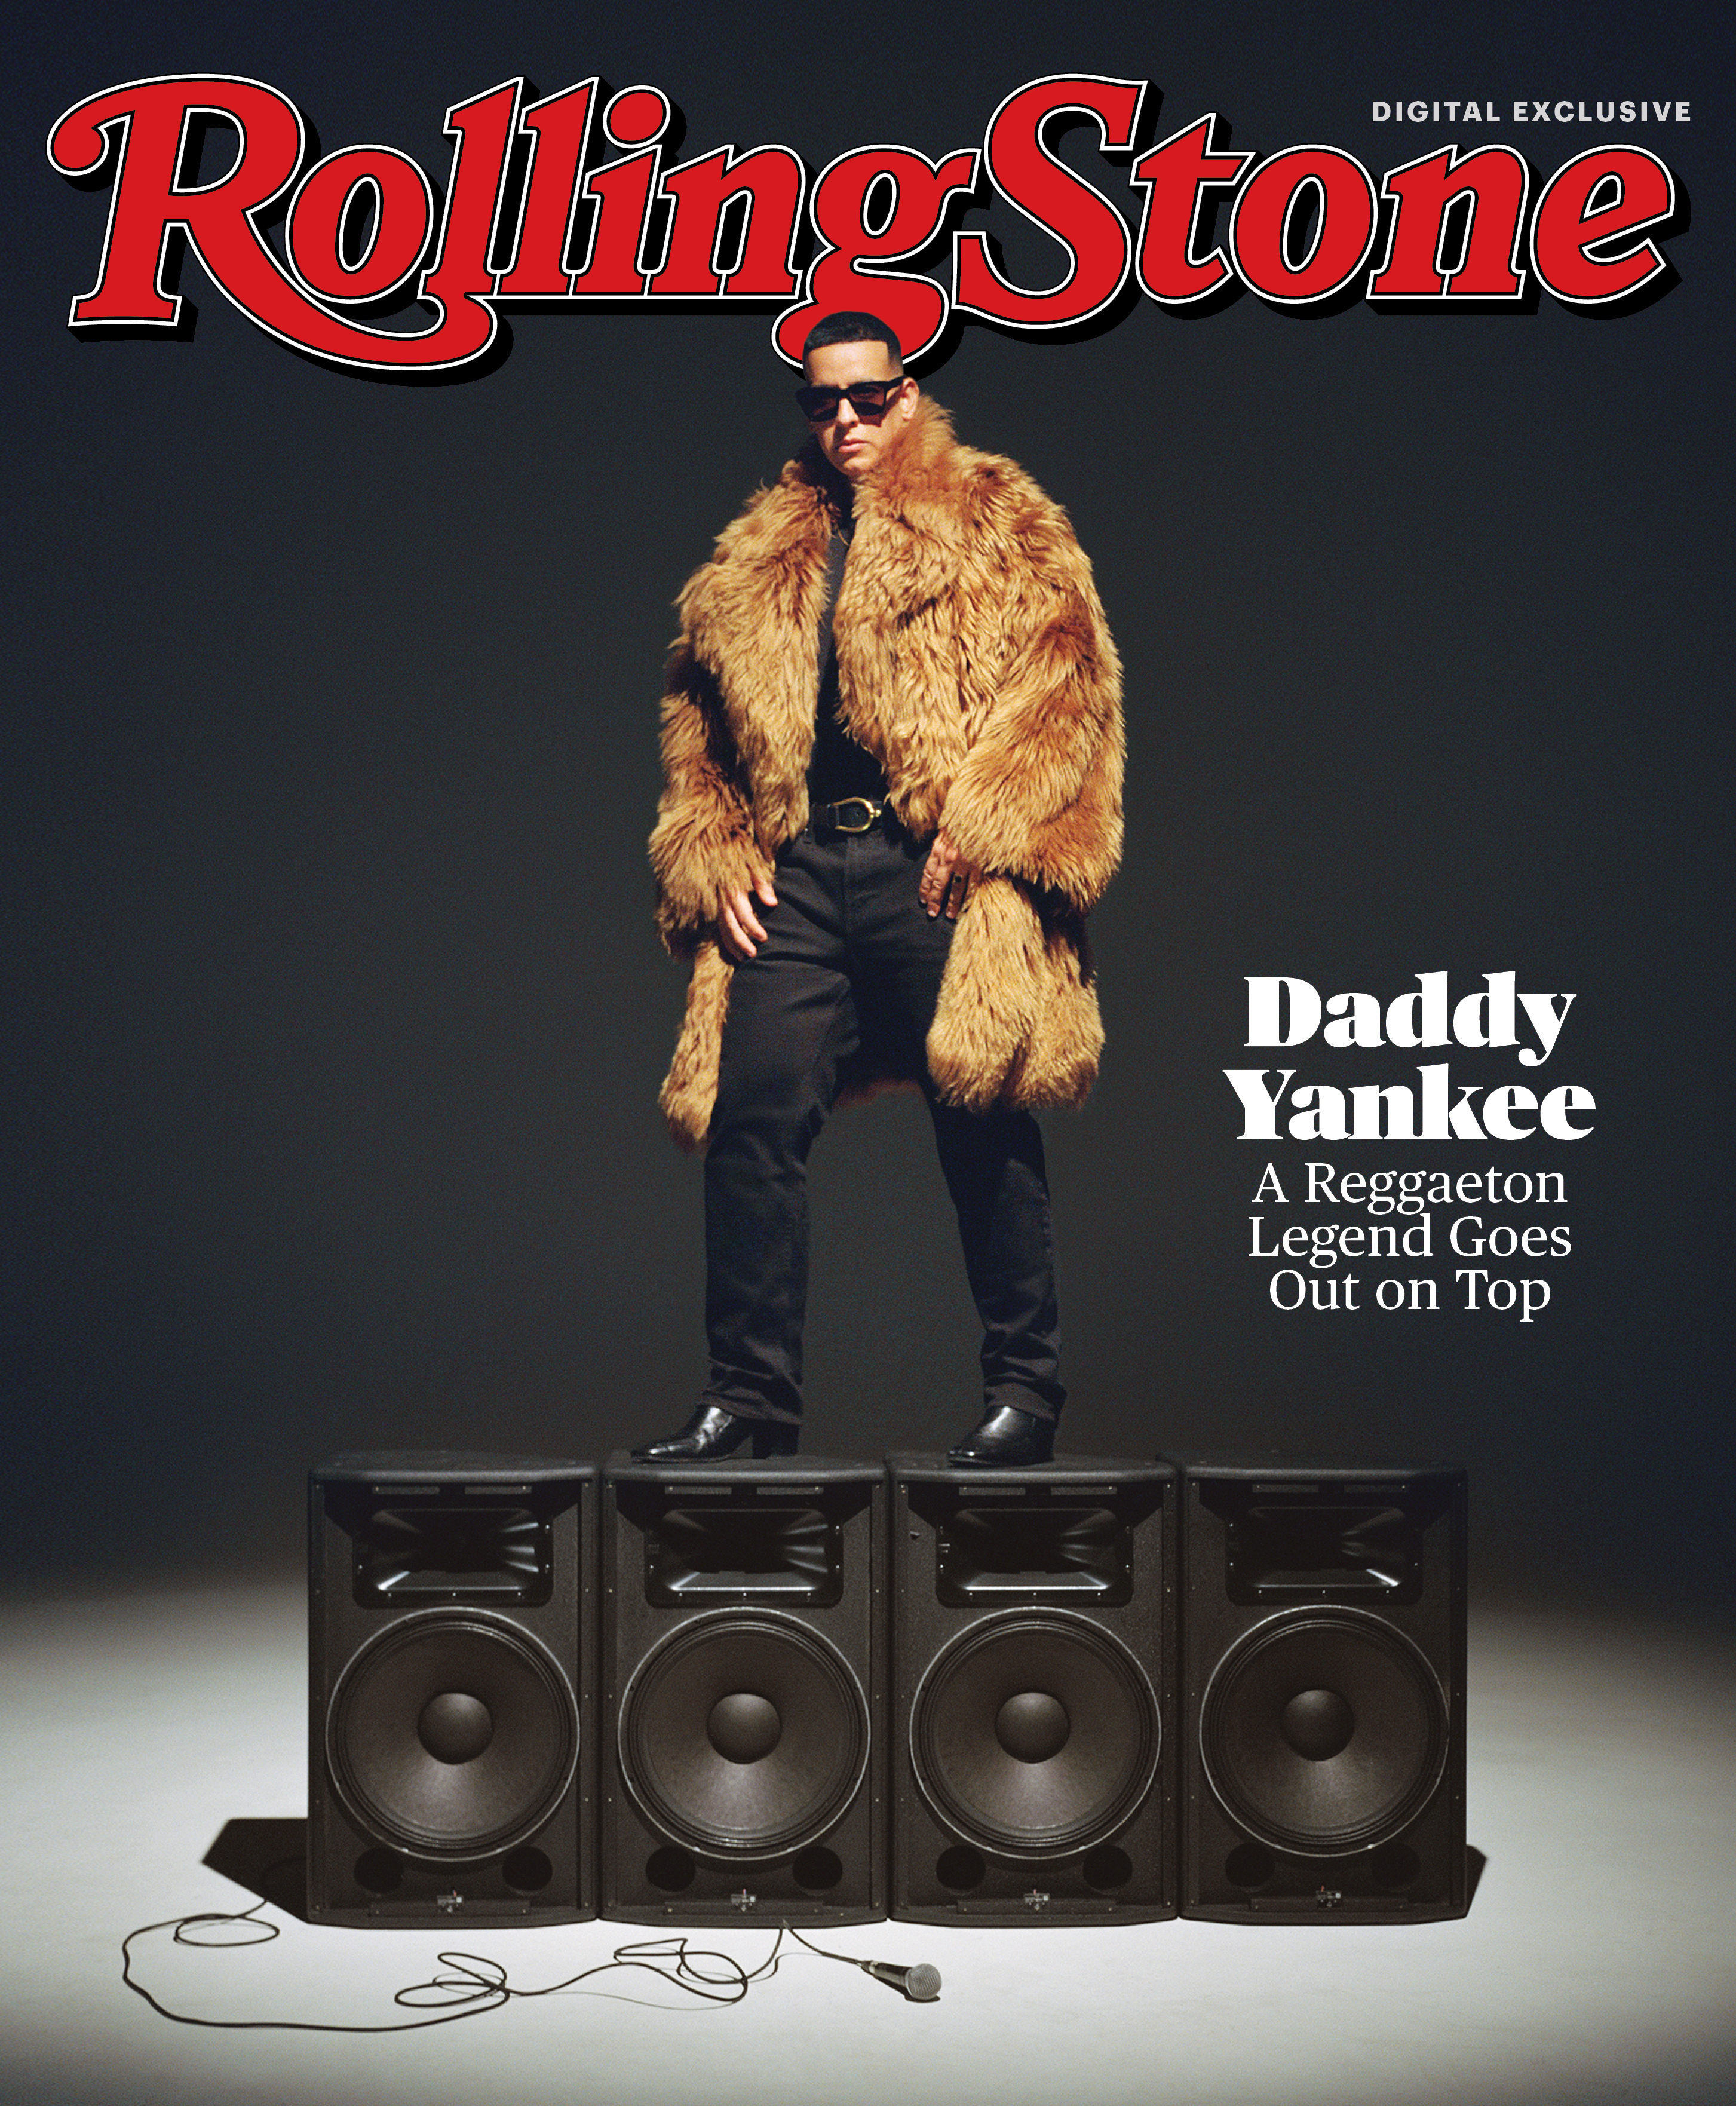 Rolling Stone “Daddy Yankee” September 19, 2022